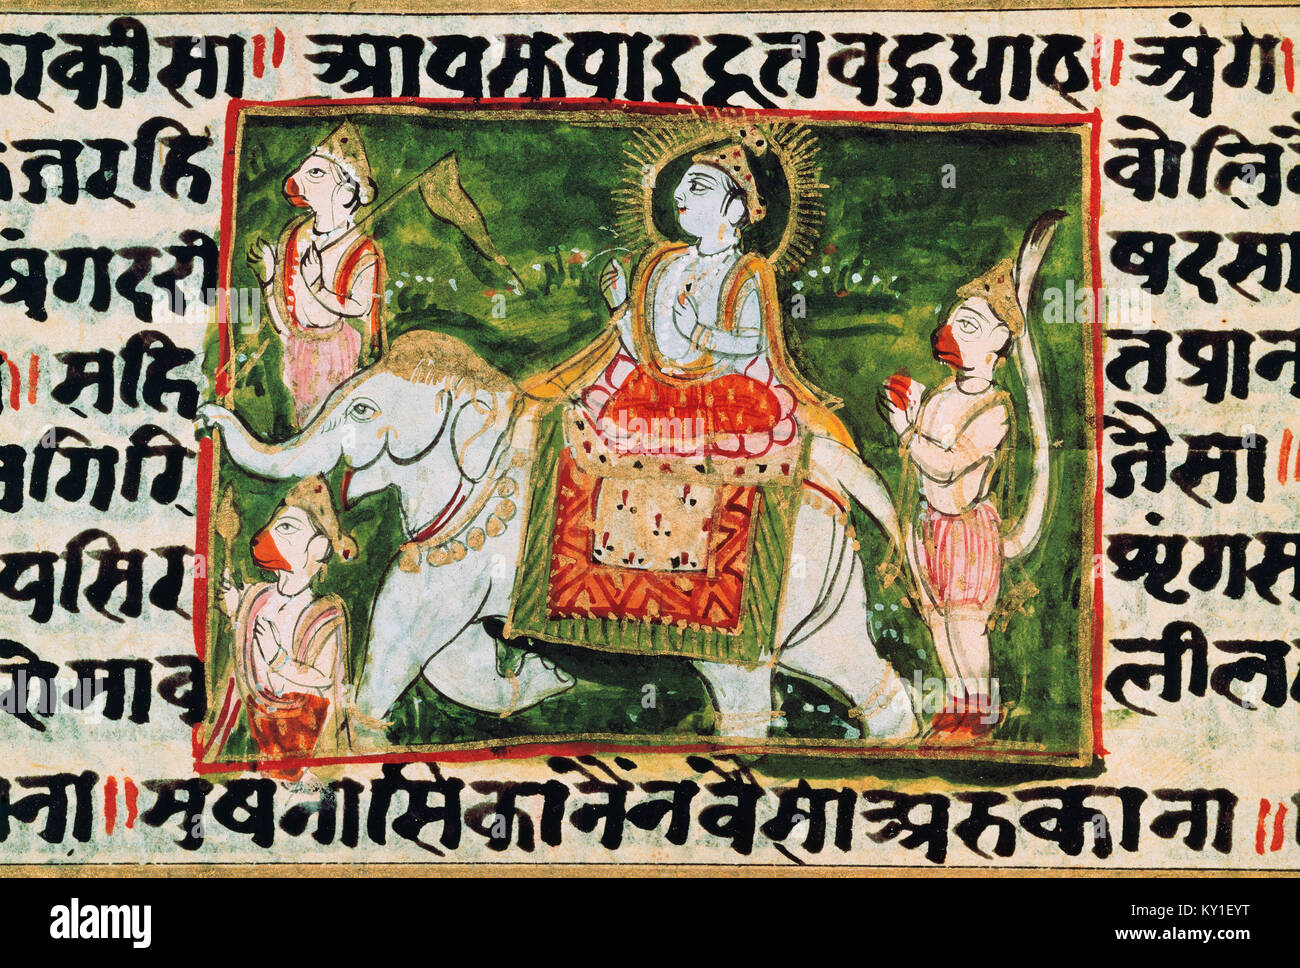 Ramayana. Ancient Indian epic poem. 750-500 BC by Valmiki (5th century BC). Rama on an elephant and Hanumat, king of the monkeys. National Library of Paris. France. Stock Photo